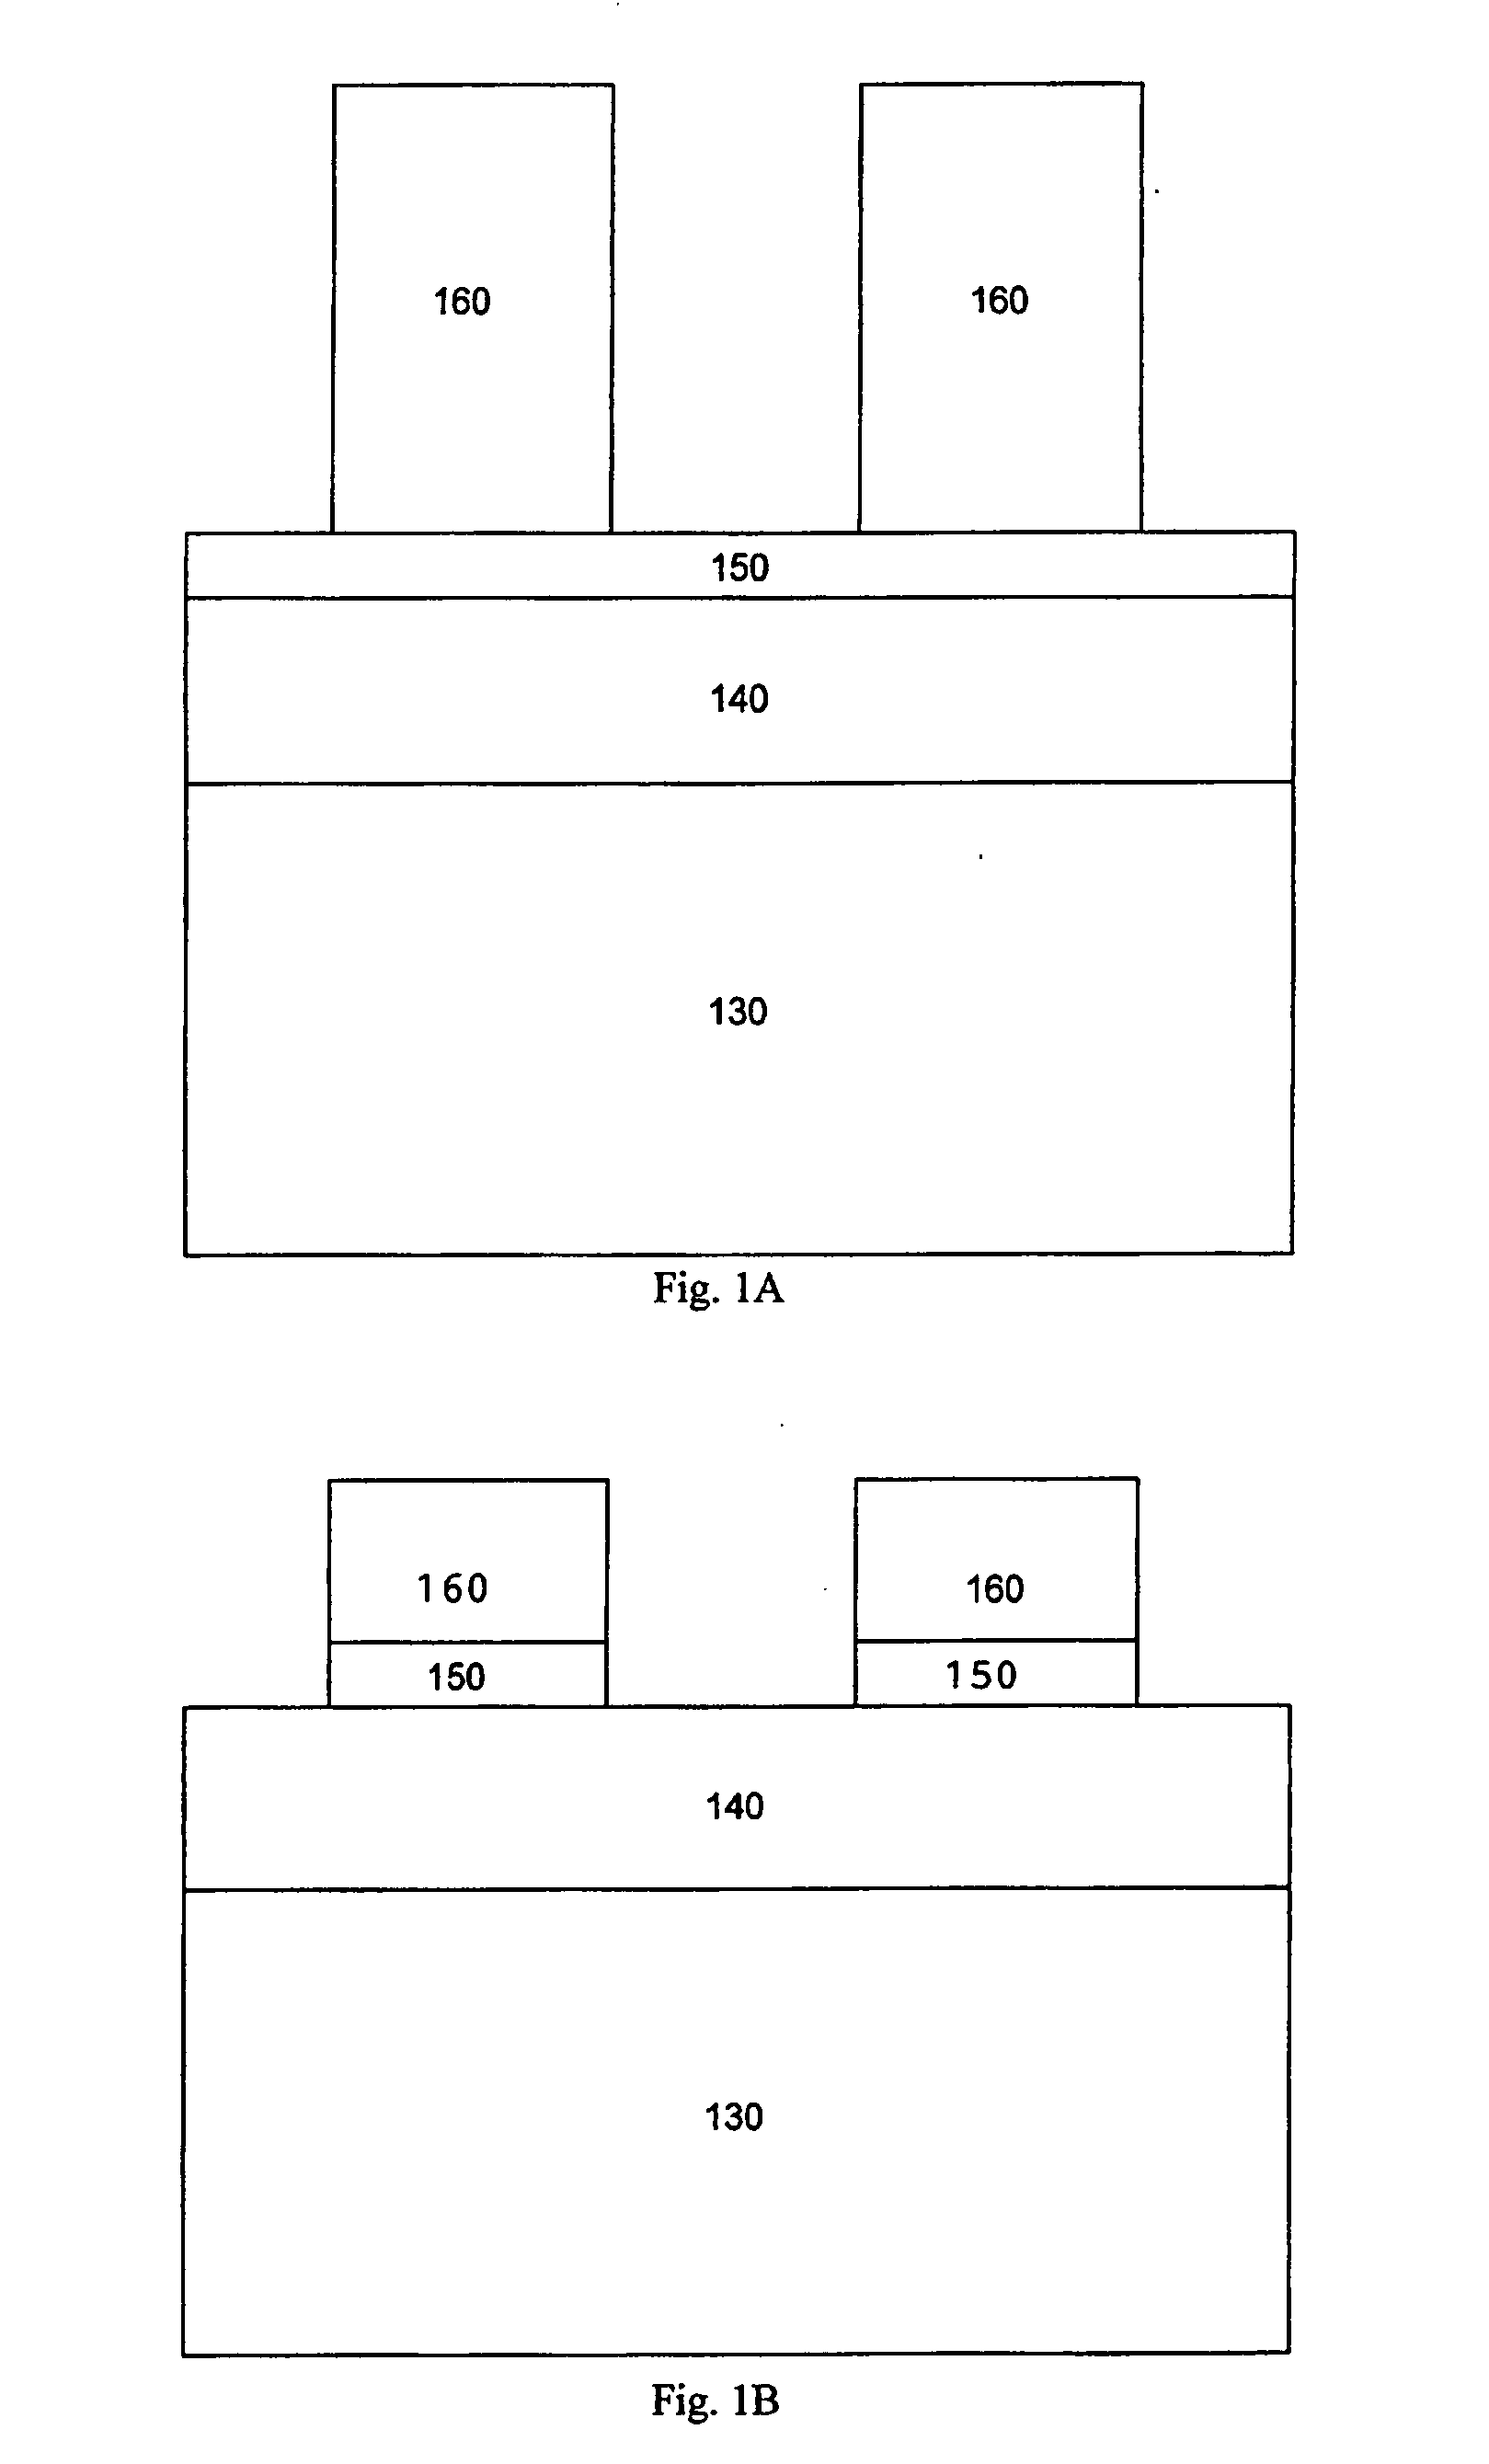 Etch pattern definition using a CVD organic layer as an anti-reflection coating and hardmask